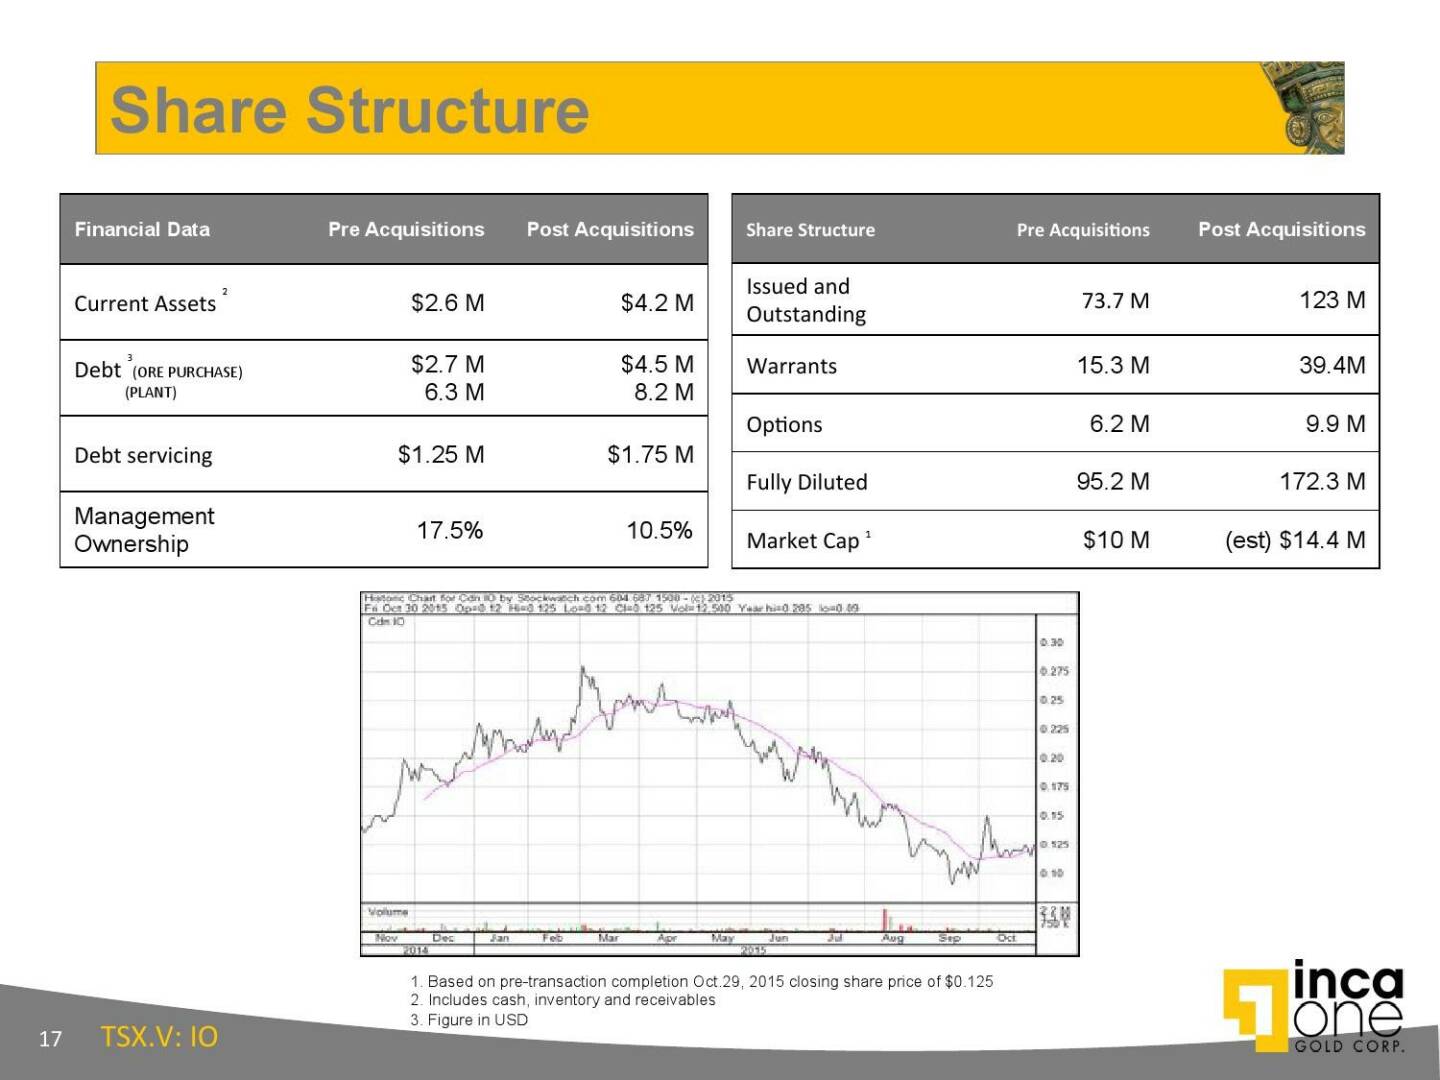 Share Structure